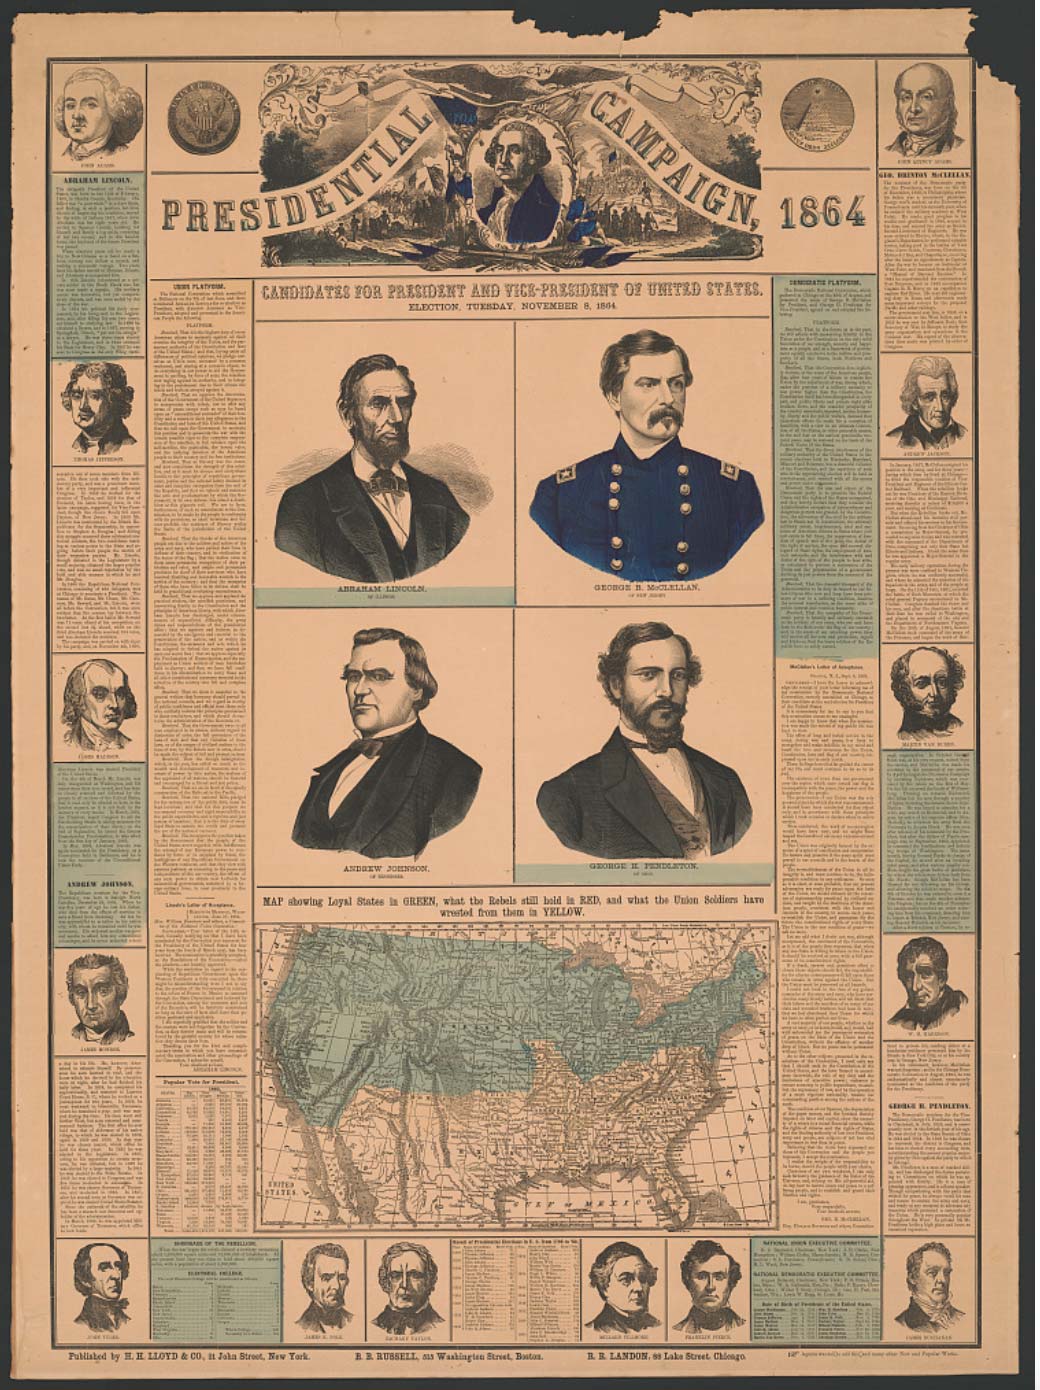 1864 Presidential Election Poster